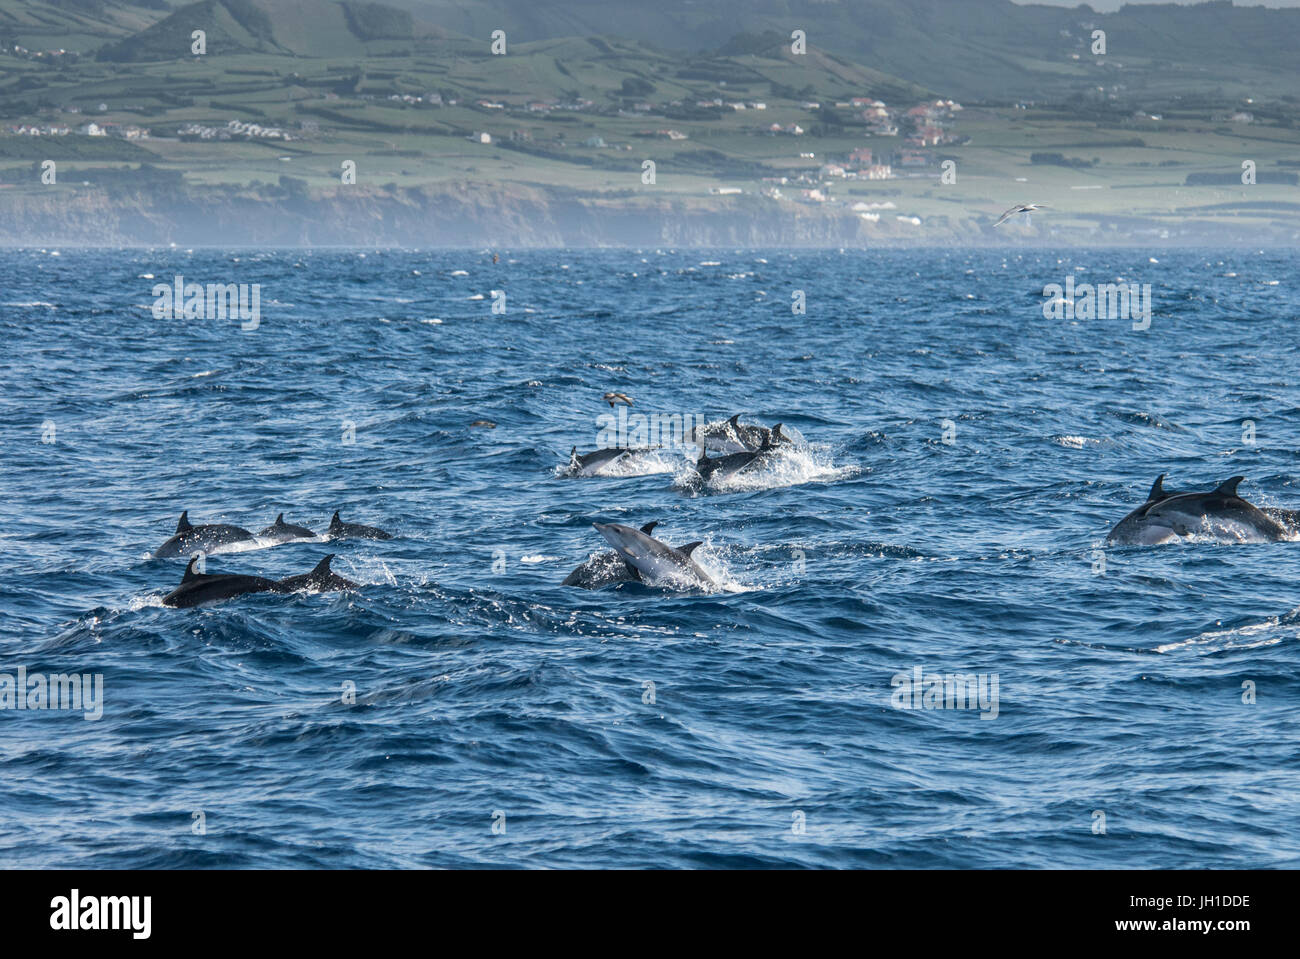 Atlantic spotted dolphin, Stenella frontalis group, porpoising in front of Horta, Faial Island, Azores, Atlantic Ocean Stock Photo